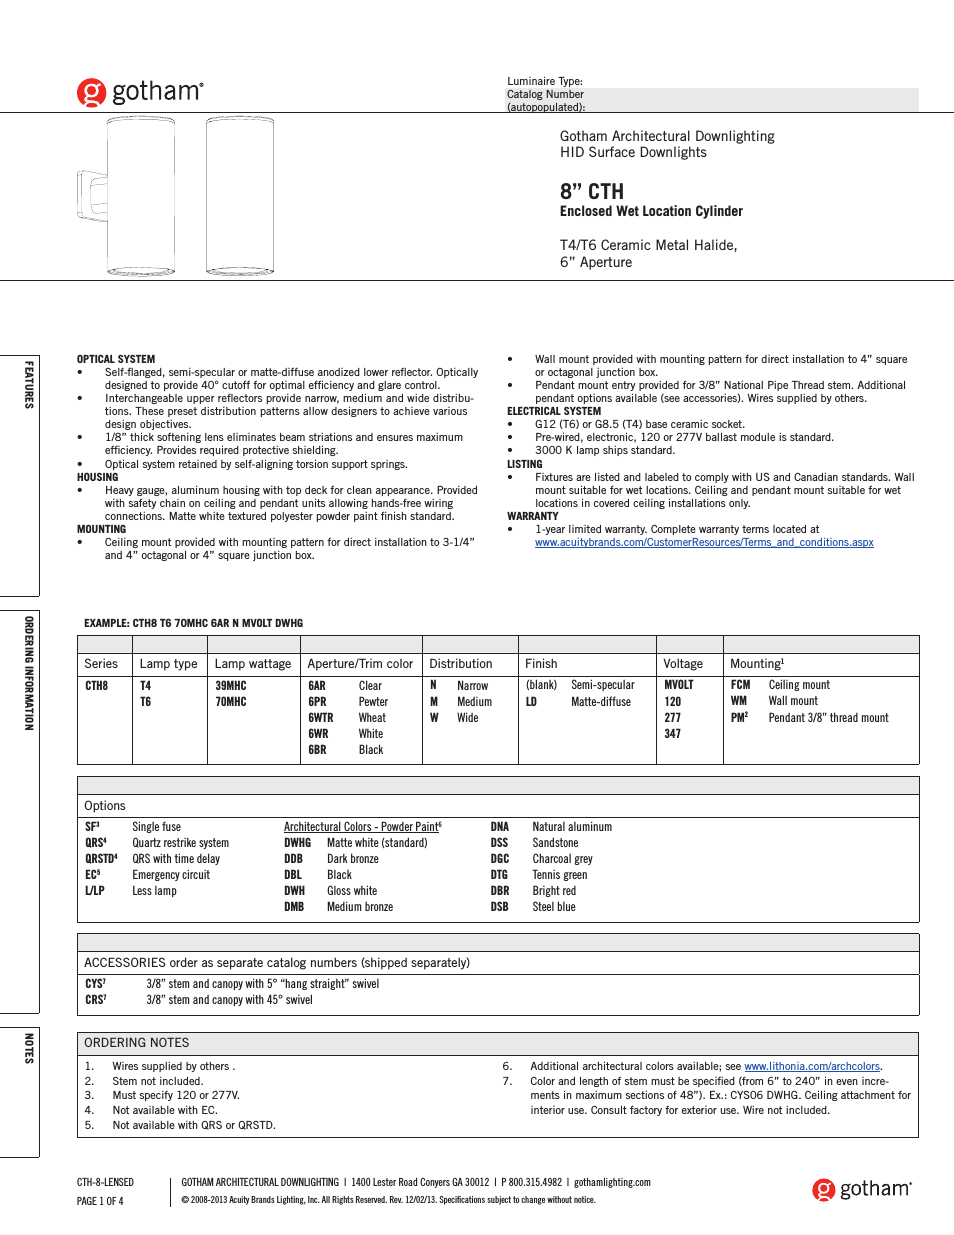 8 CTH Enclosed Wet Location Cylinder SpecSheet